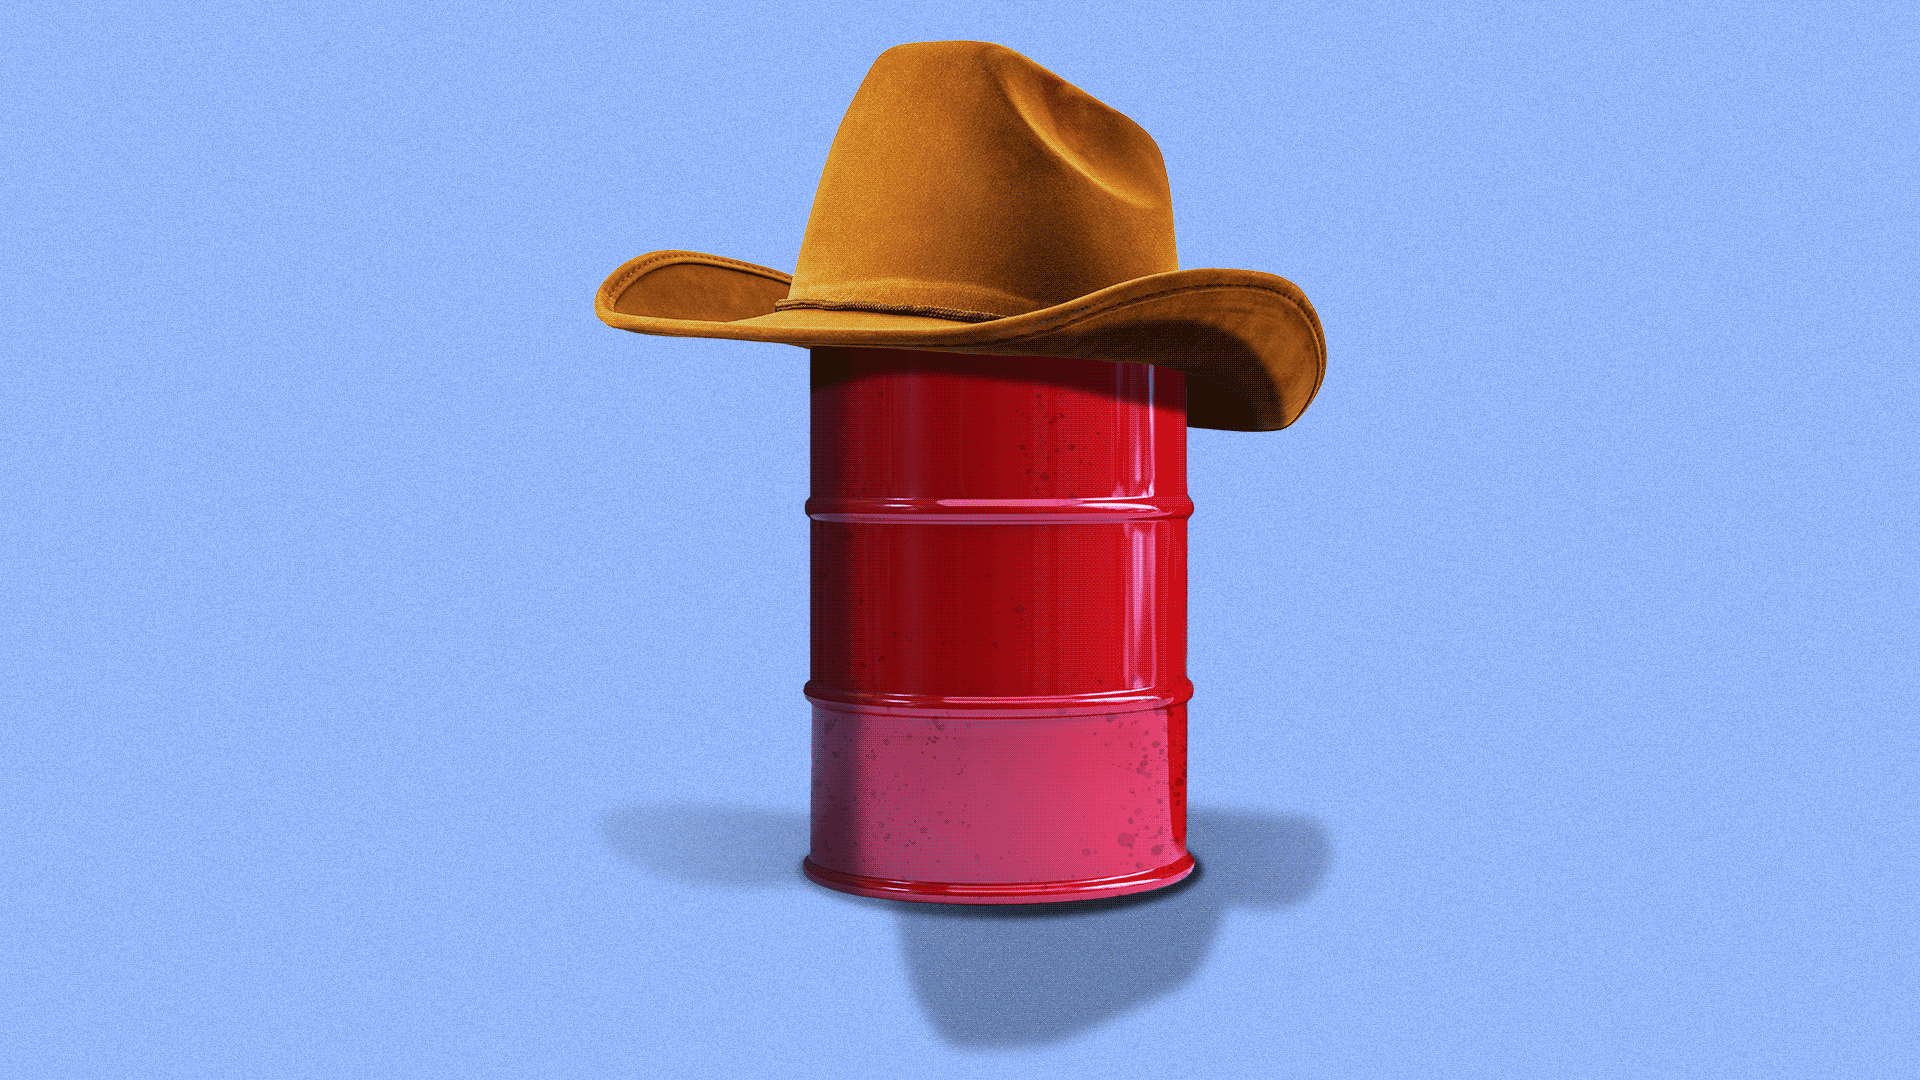 Animated gif of an oil barrel disappearing under a cowboy hat.